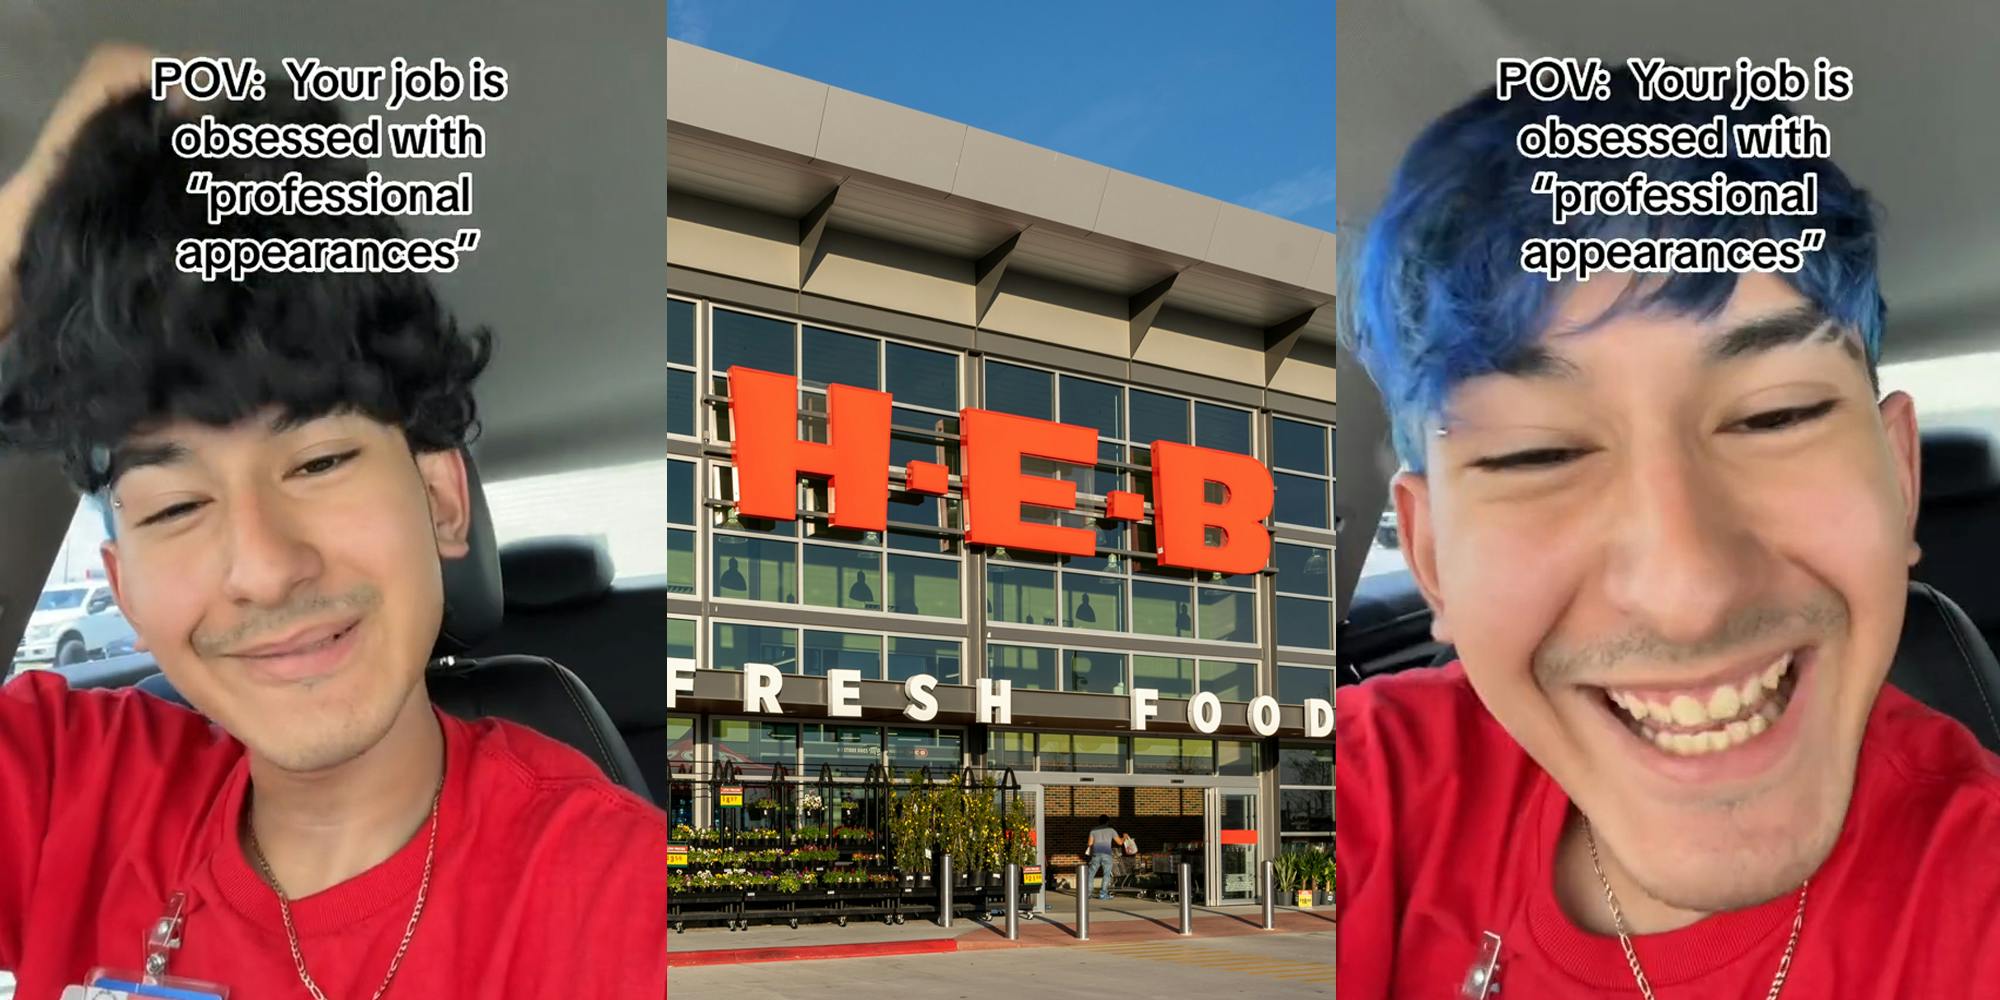 HEB employee in car with caption "POV: Your job is obsessed with 'professional appearances" (l) HEB building with sign (c) HEB employee in car with caption "POV: Your job is obsessed with 'professional appearances" (r)